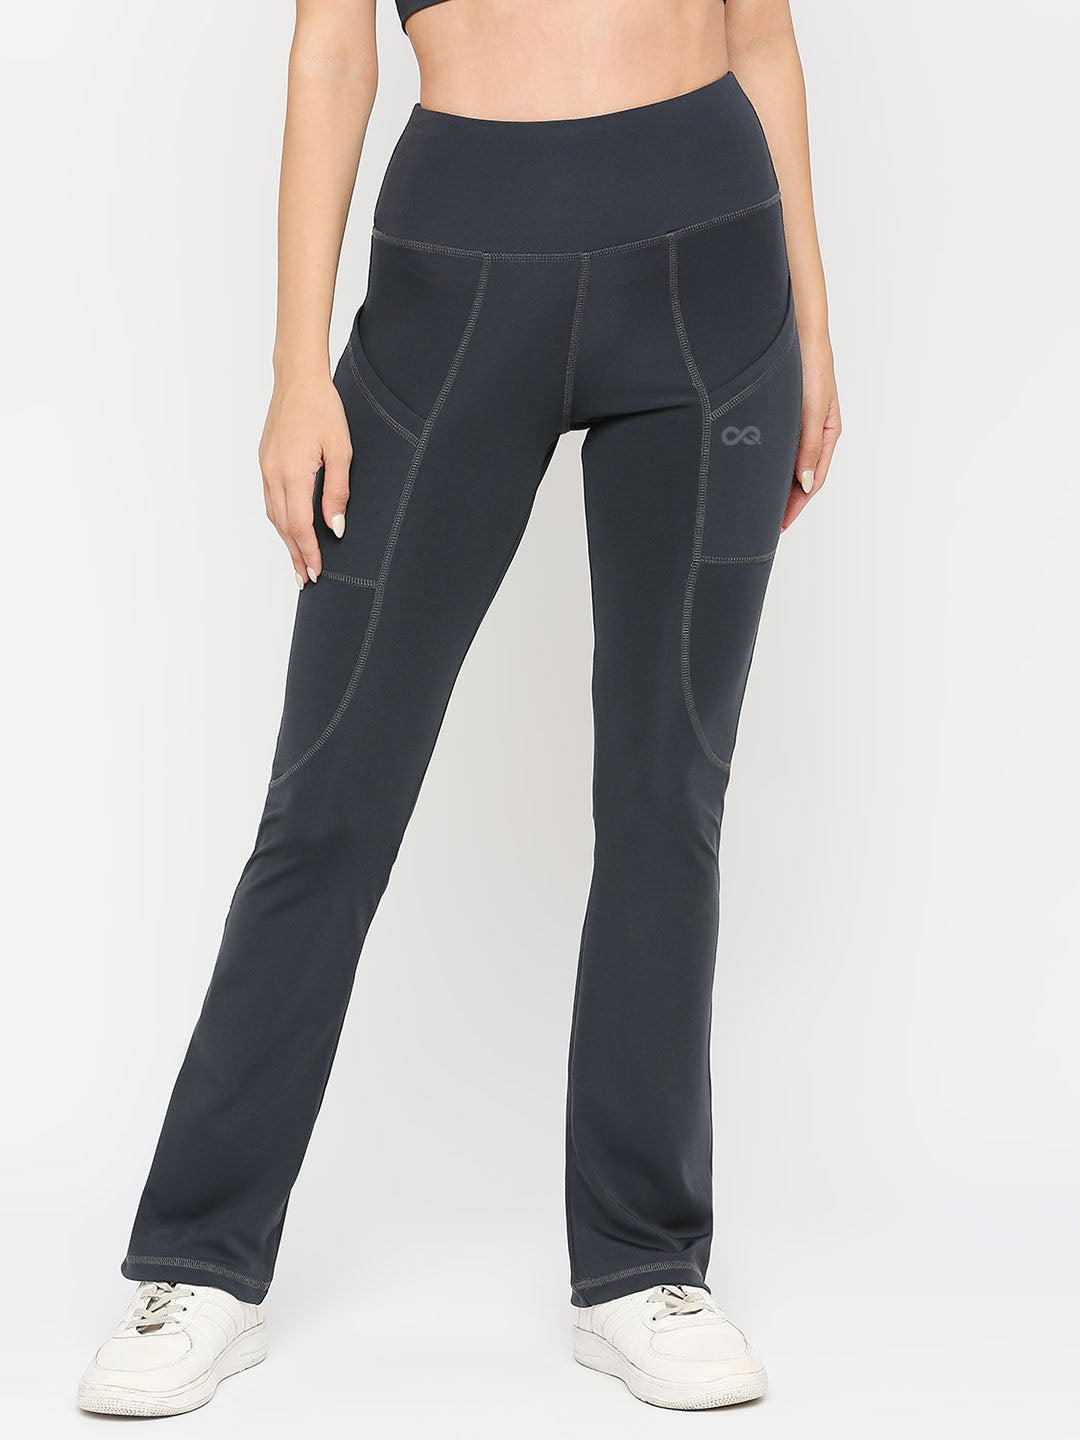 Women's Charcoal Flared Sports Leggings - Stay Comfortable and Stylish